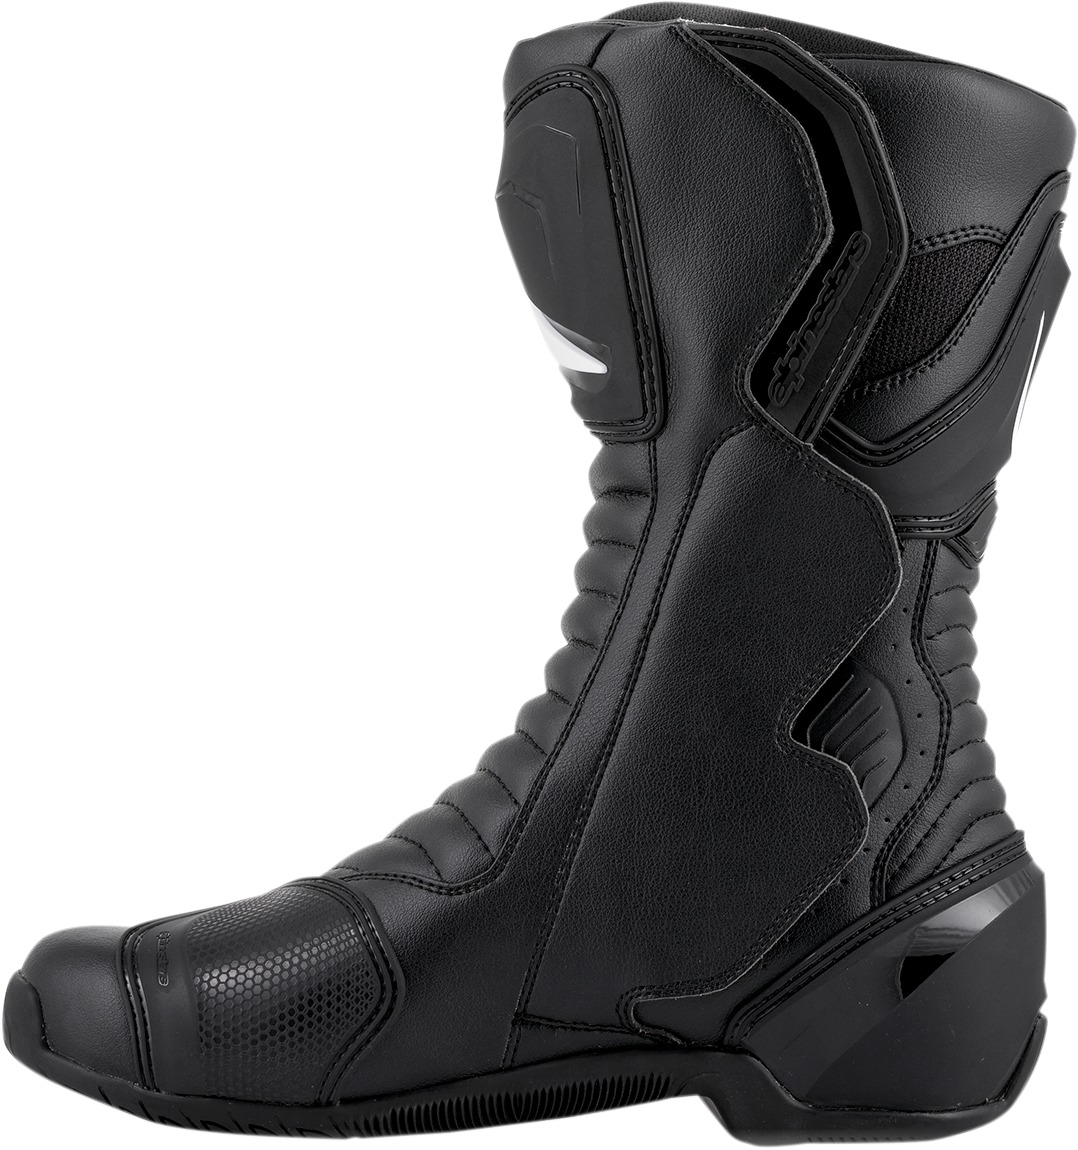 SMX-6 GTX Street Riding Boots Black US 11.5 - Click Image to Close